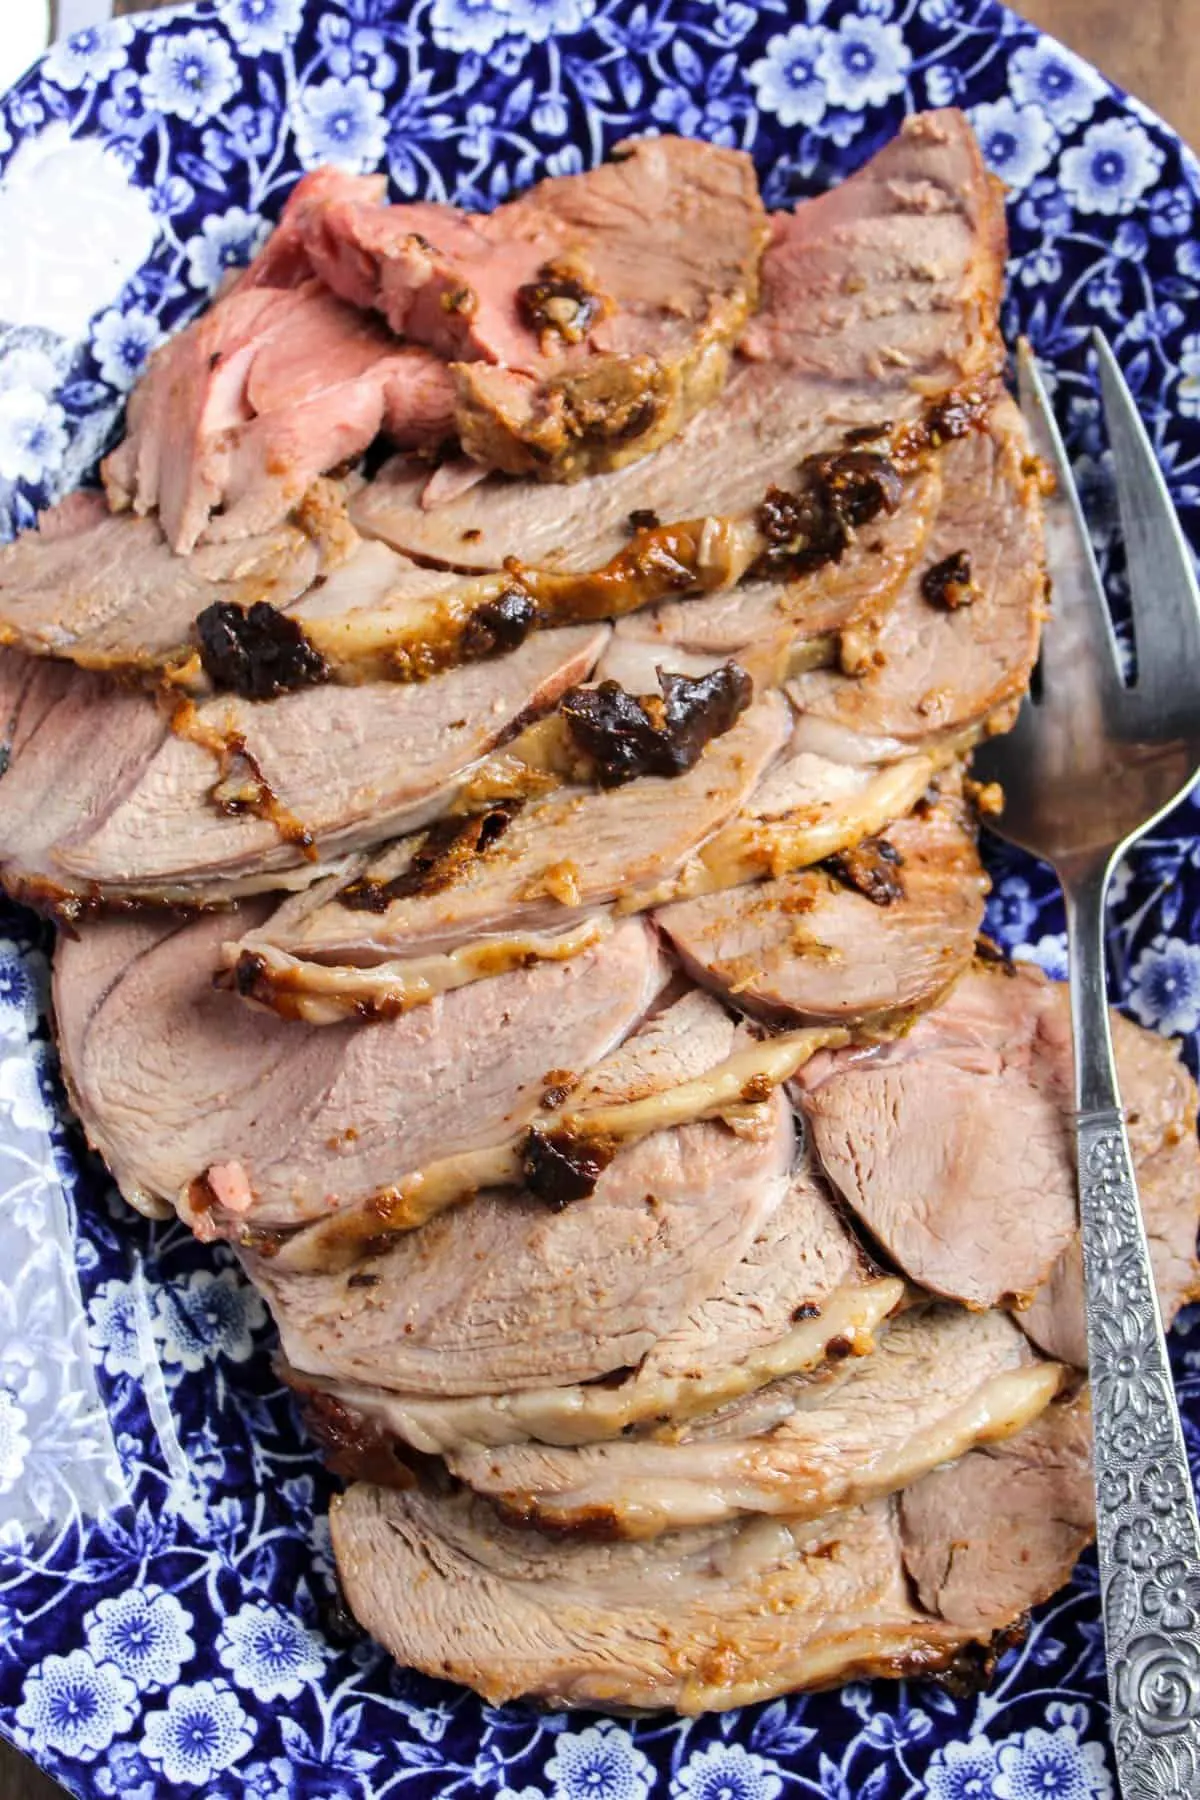 Slices of mustard and herb roasted boneless leg of lamb on blue and white serving platter.